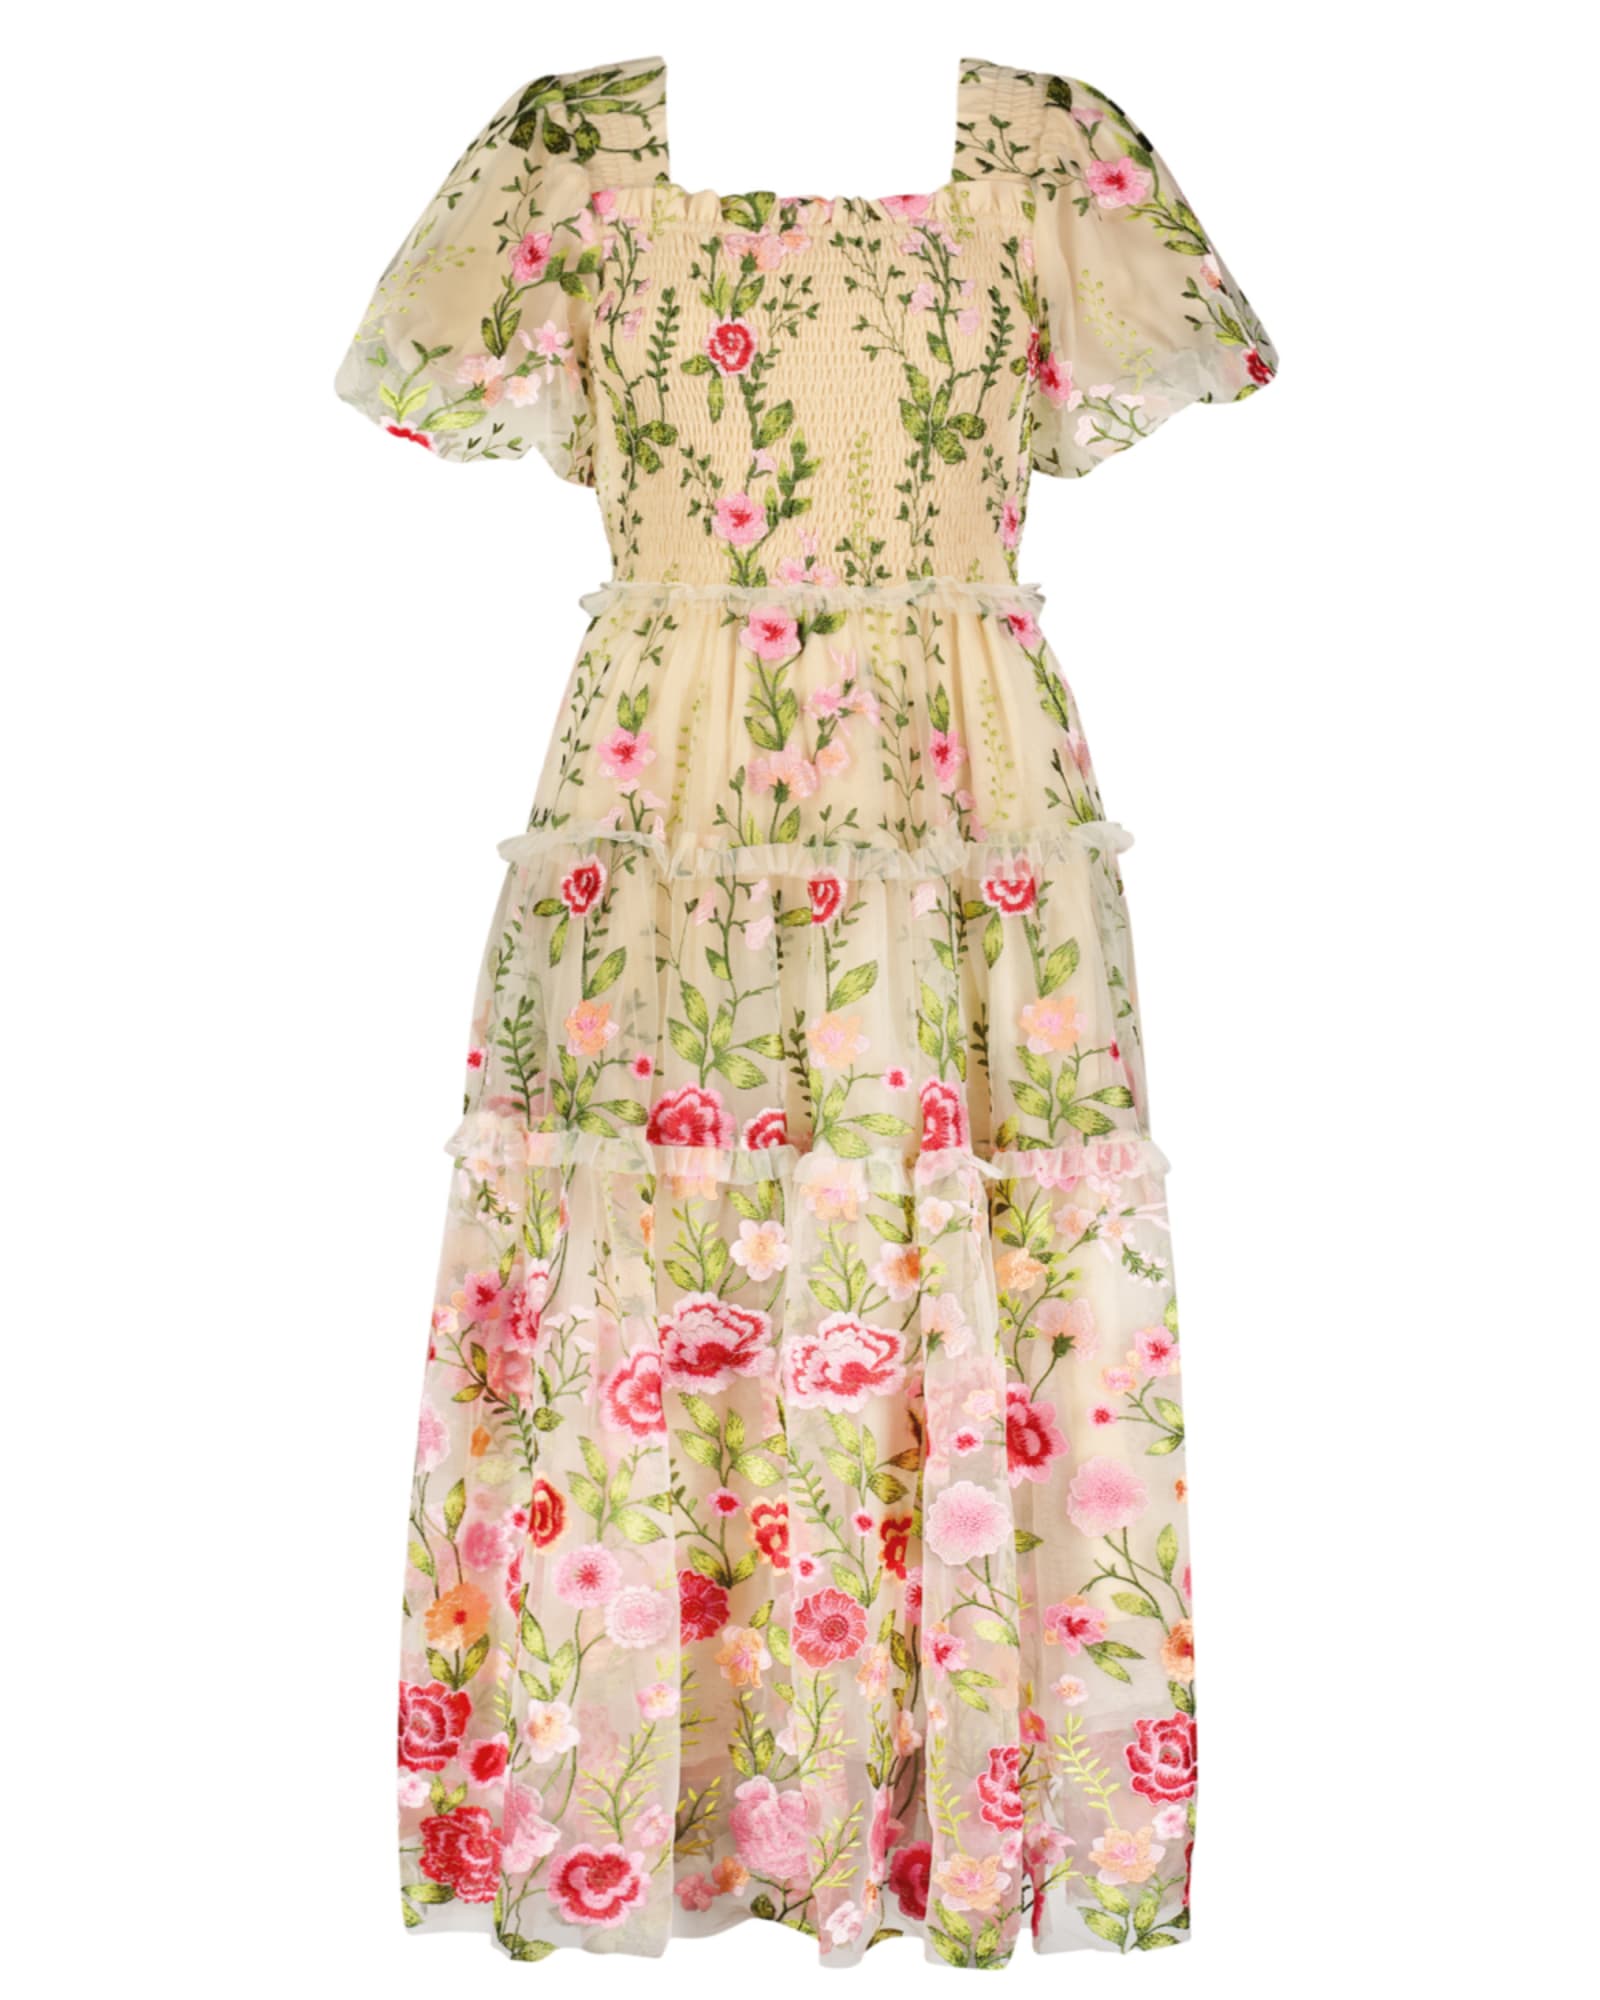 Rose Dress | Cream and Green Floral